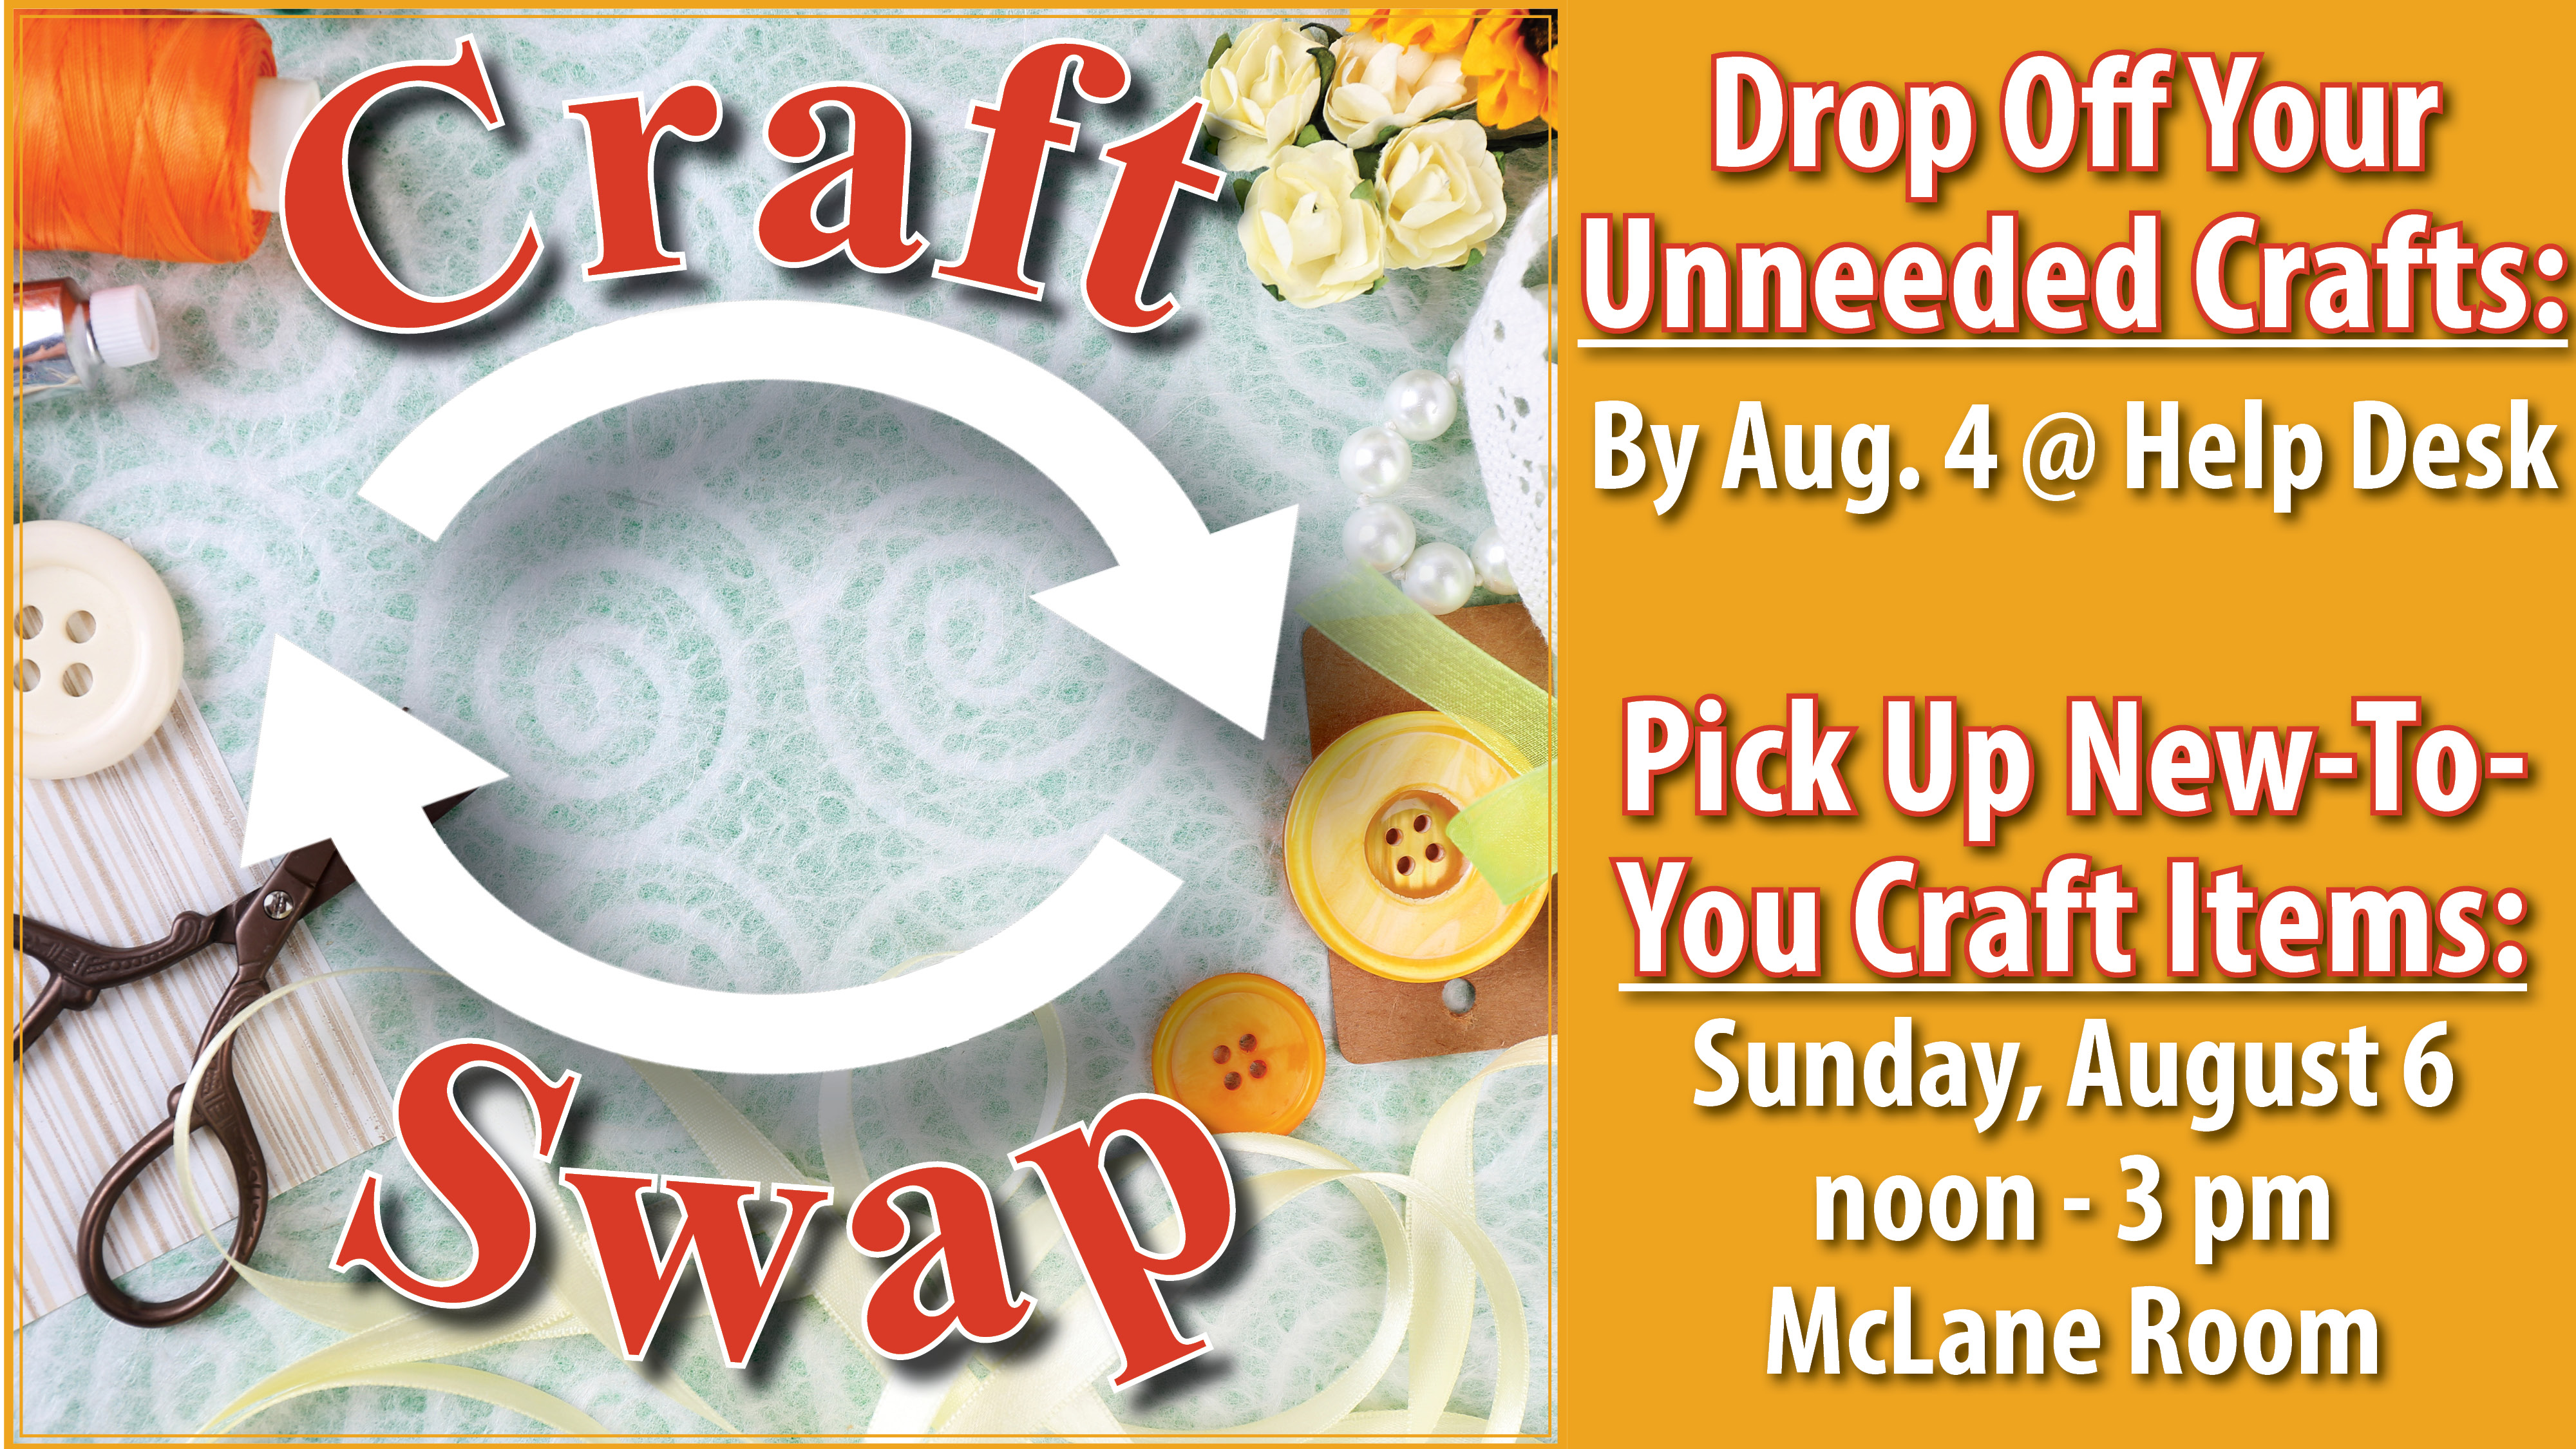 August will be an excellent month for crafters at the FDL Public Library